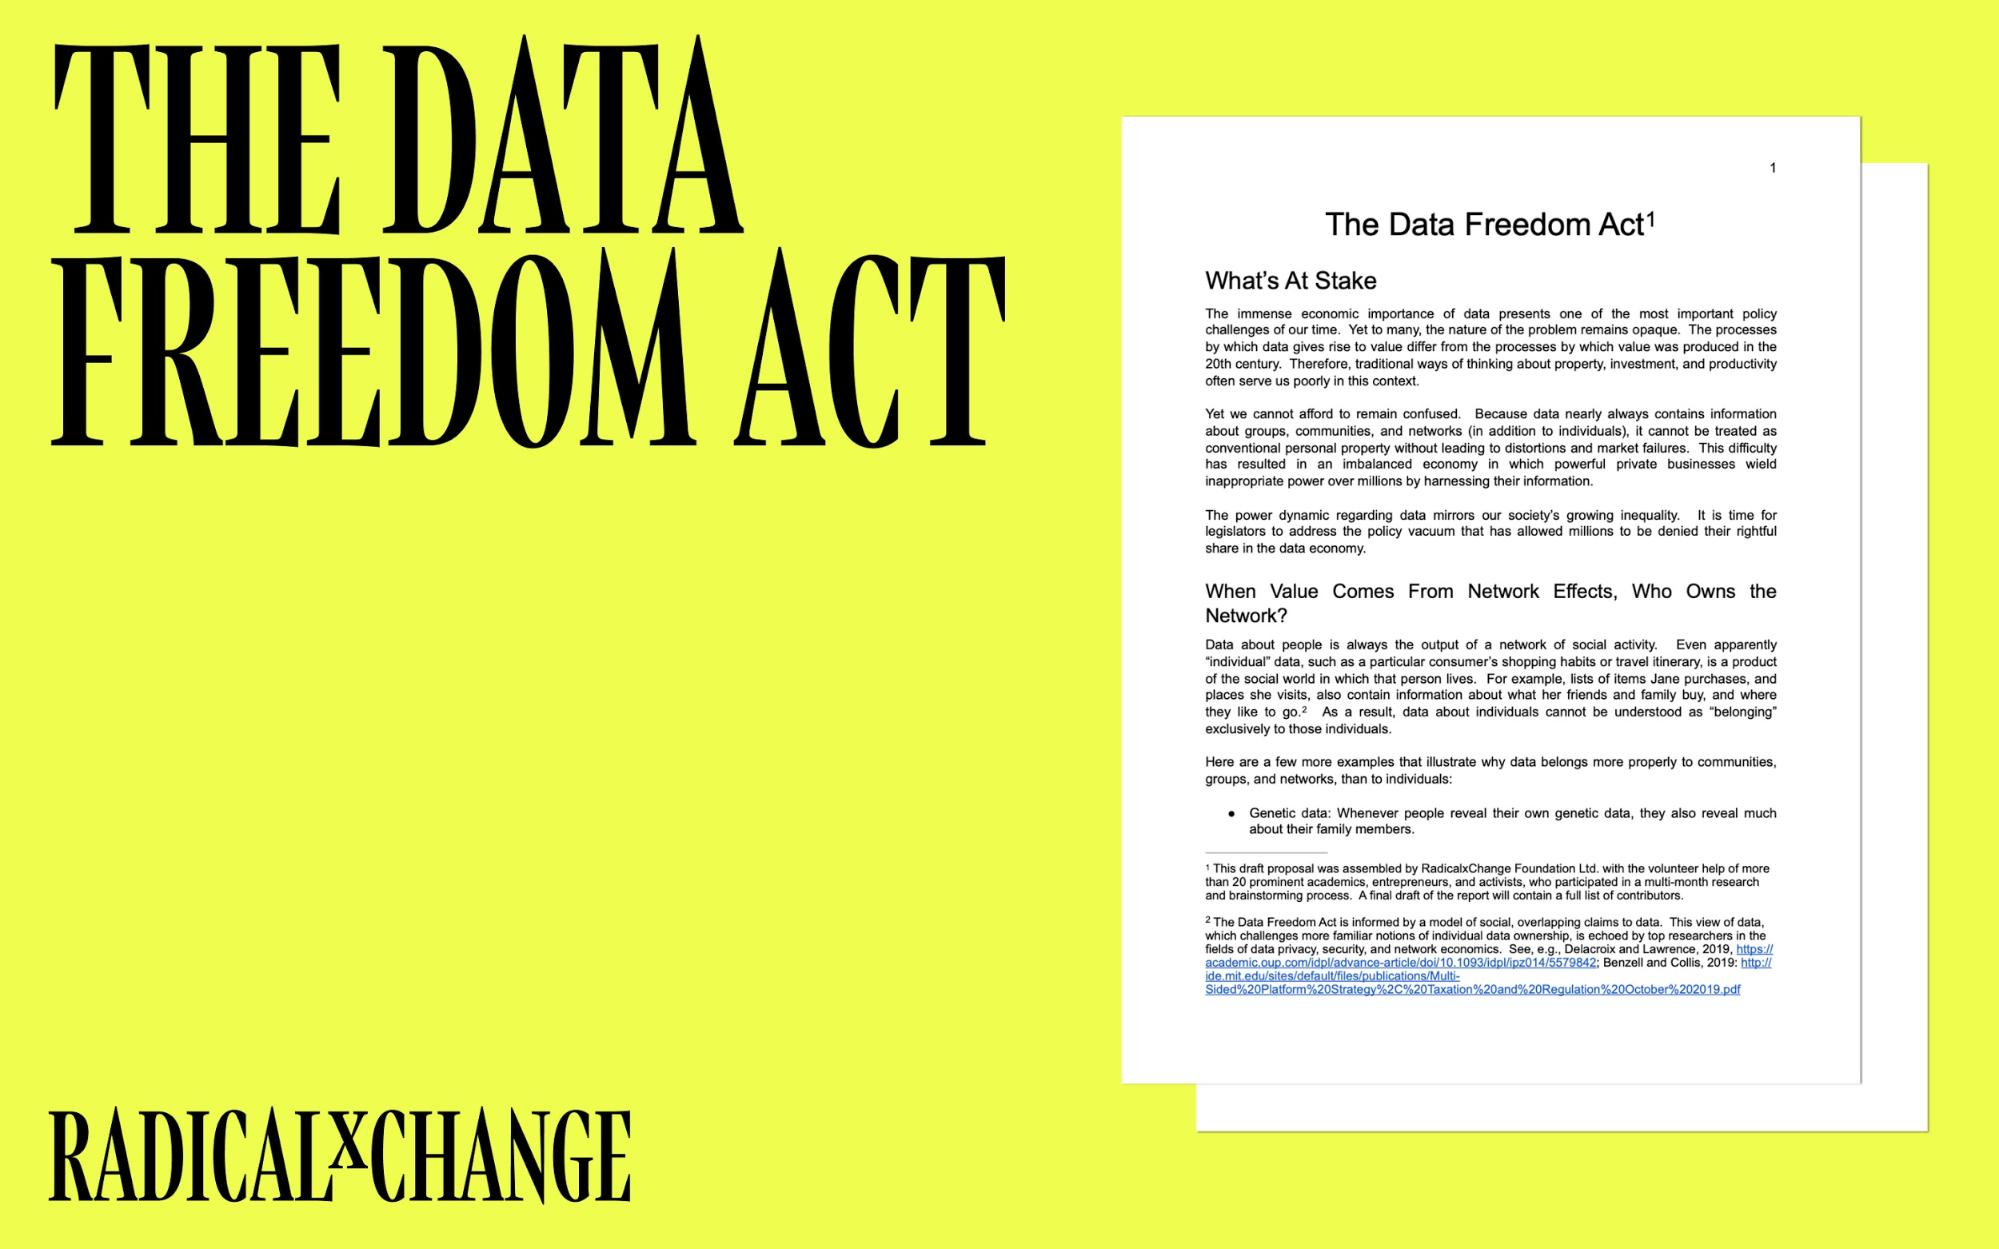 "The Data Freedom Act"